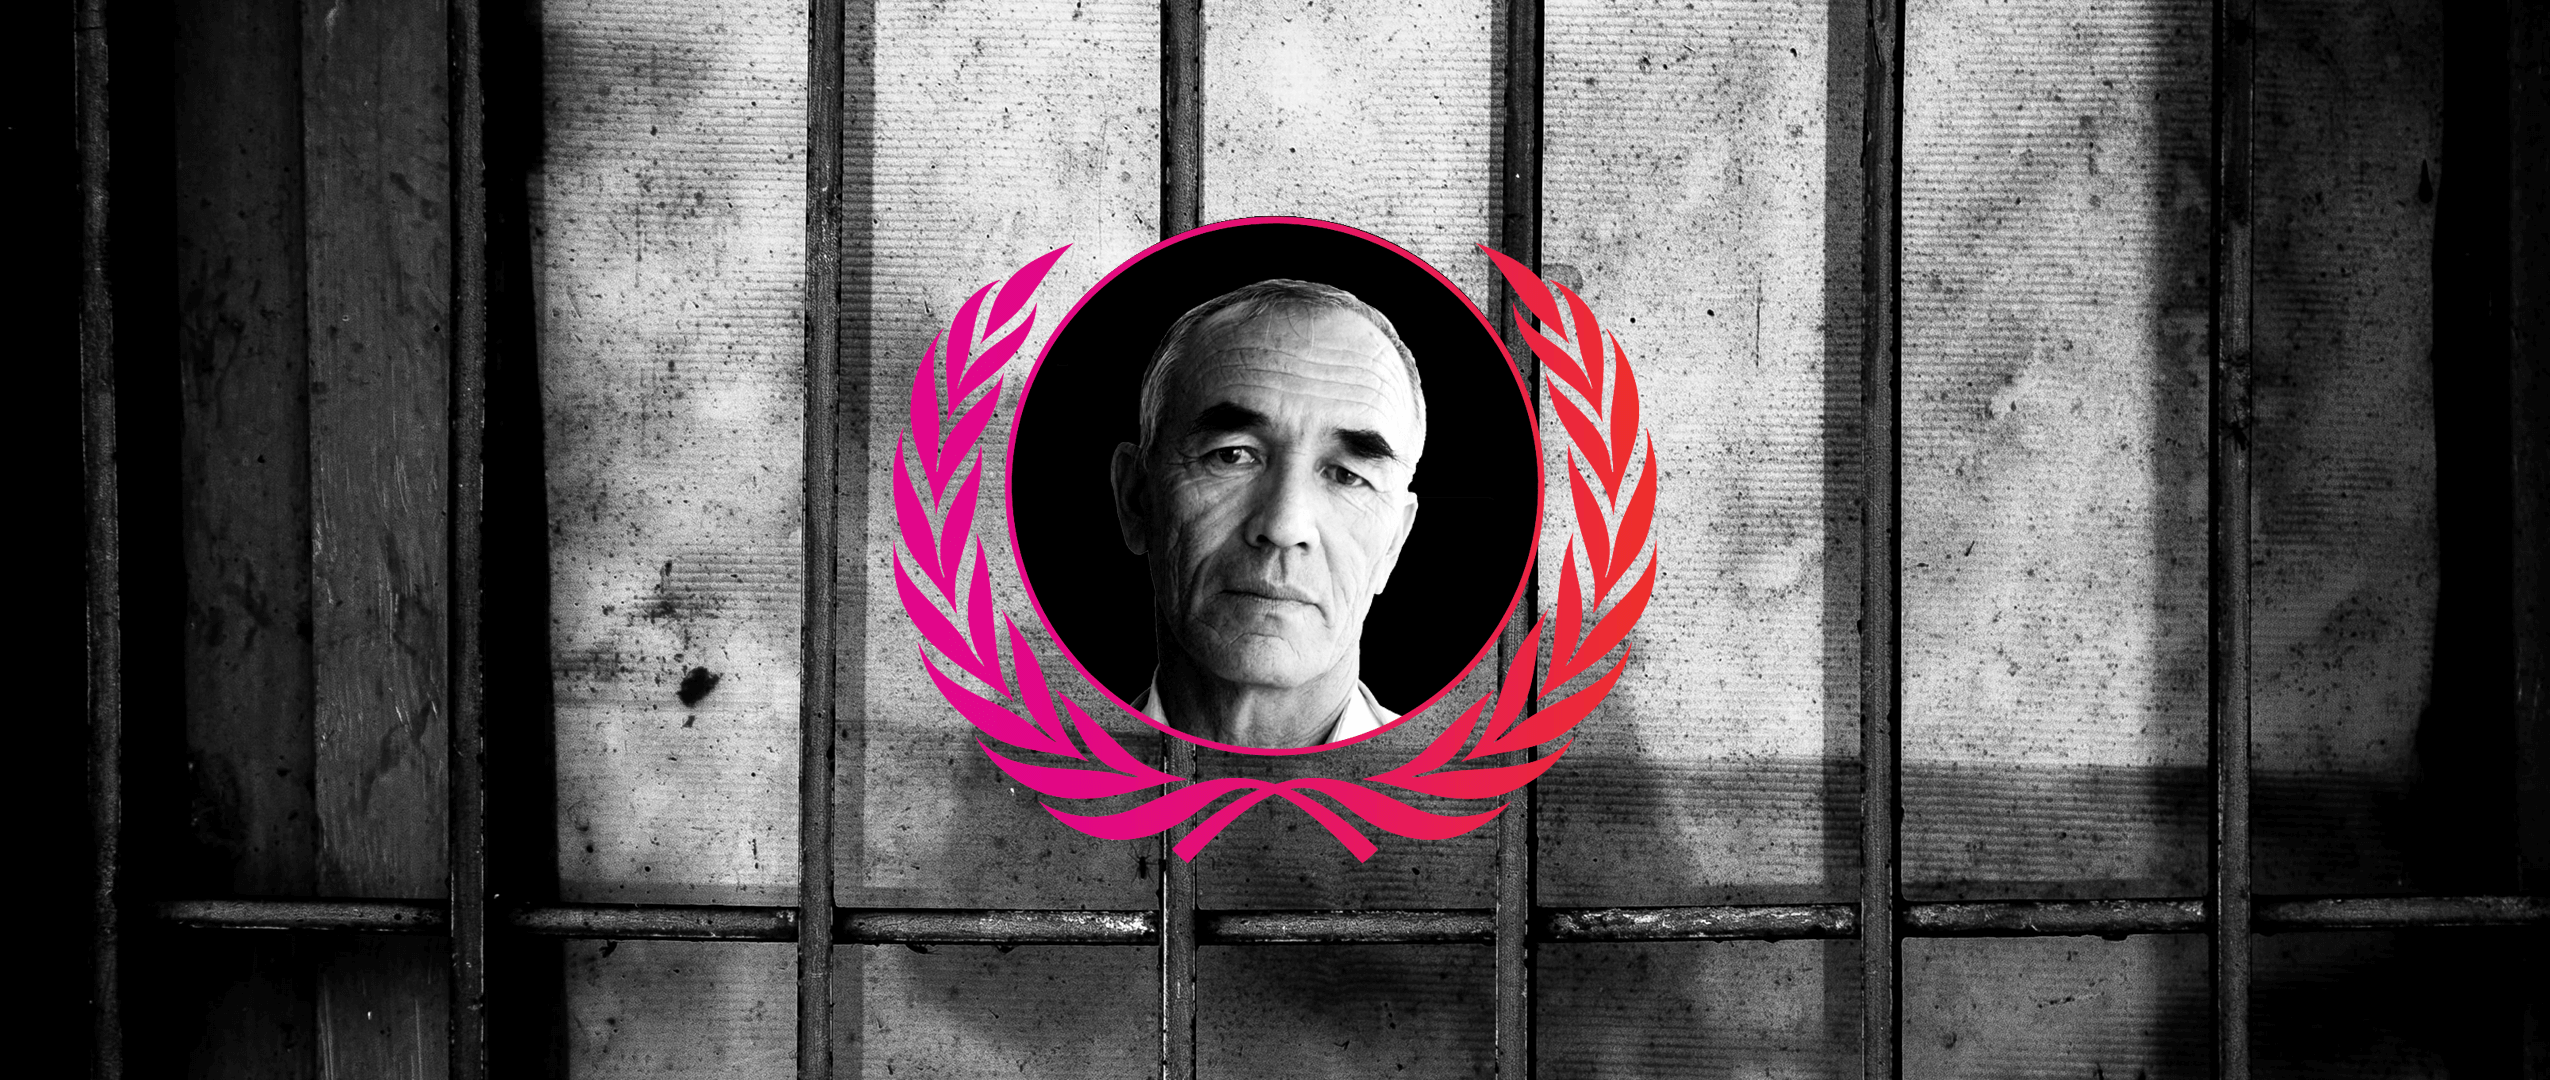 HRF Submits Urgent Appeal to the U.N. to Free Human Rights Activist Detained in Kyrgyzstan